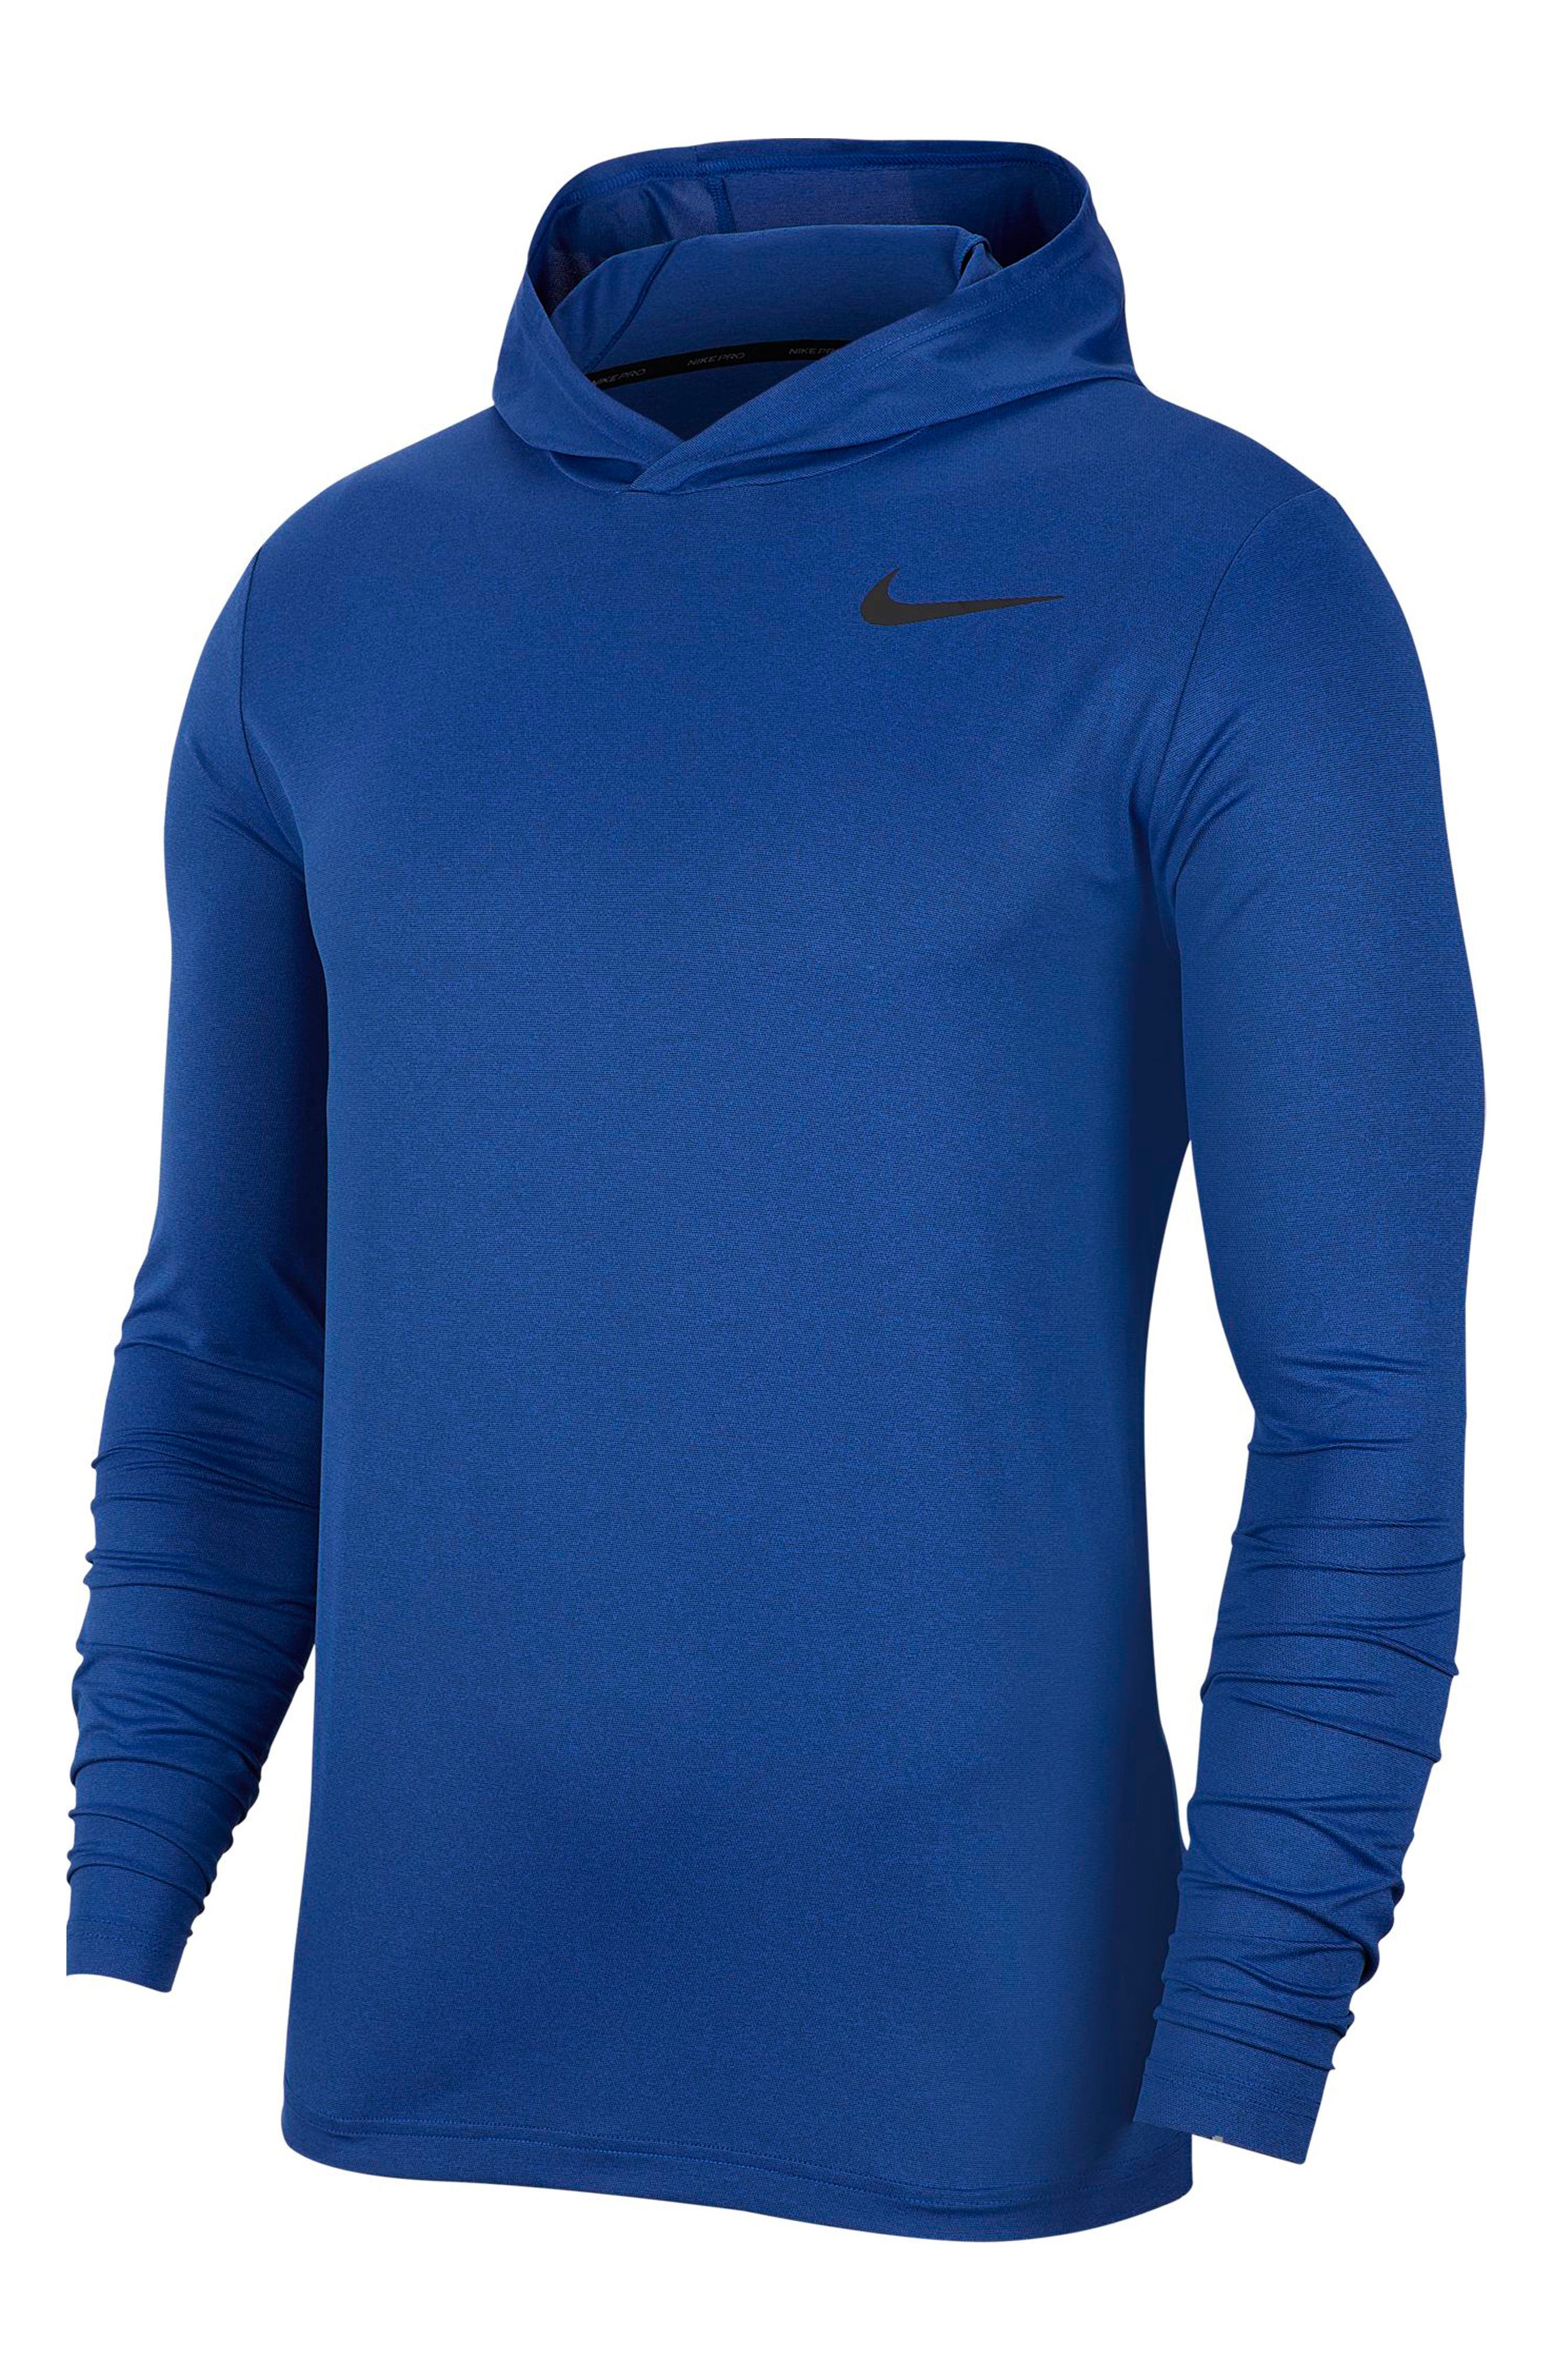 blue nike outfit mens